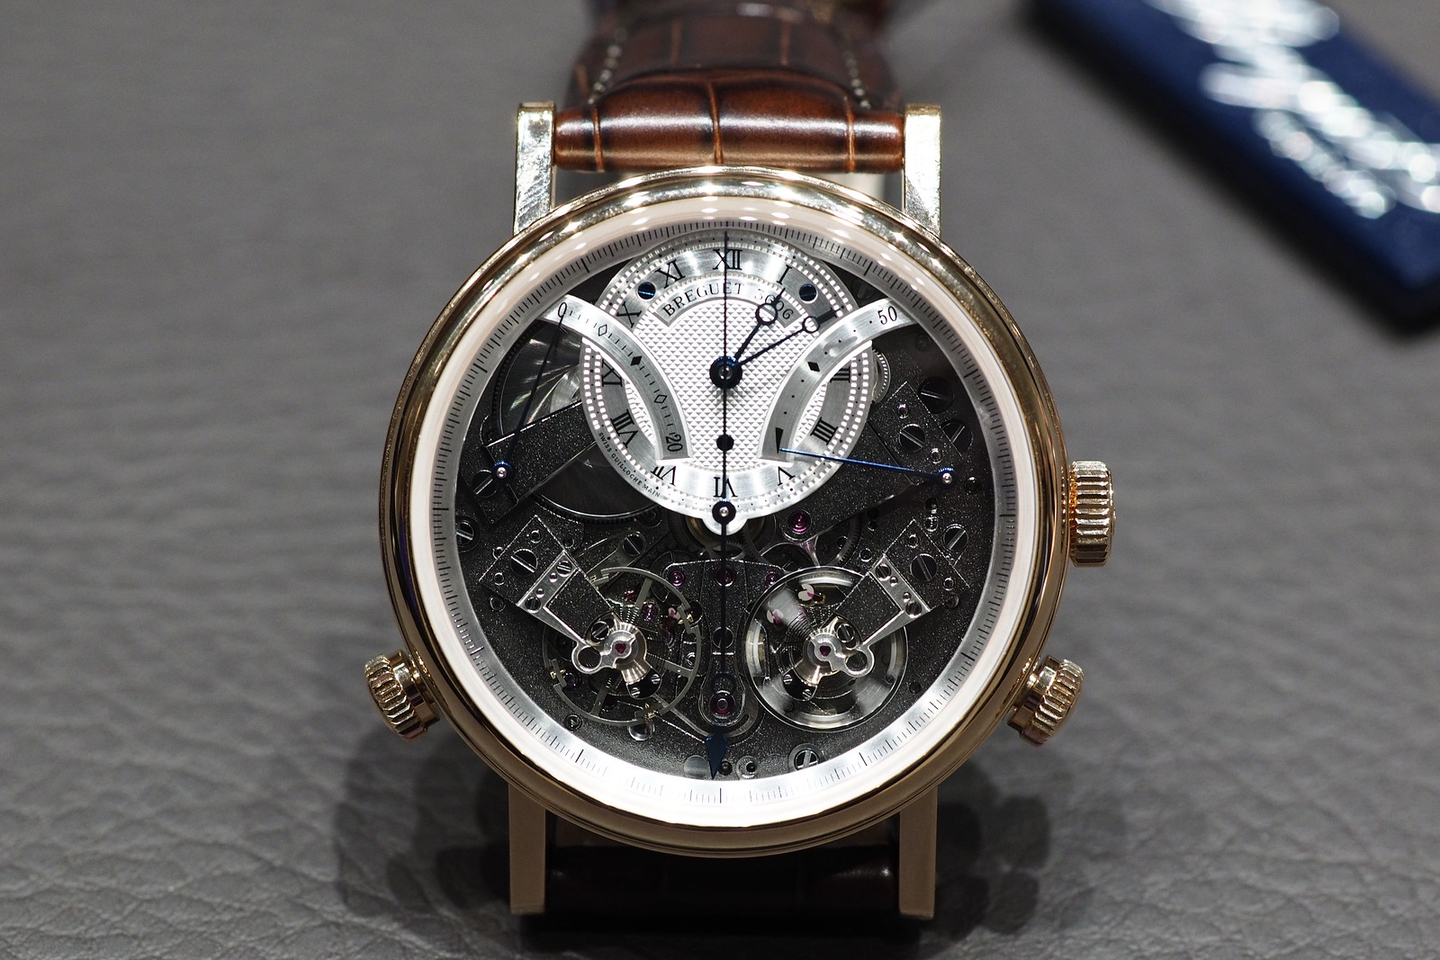 Breguet Tradition Chronograph Independent 7077 Hands-On